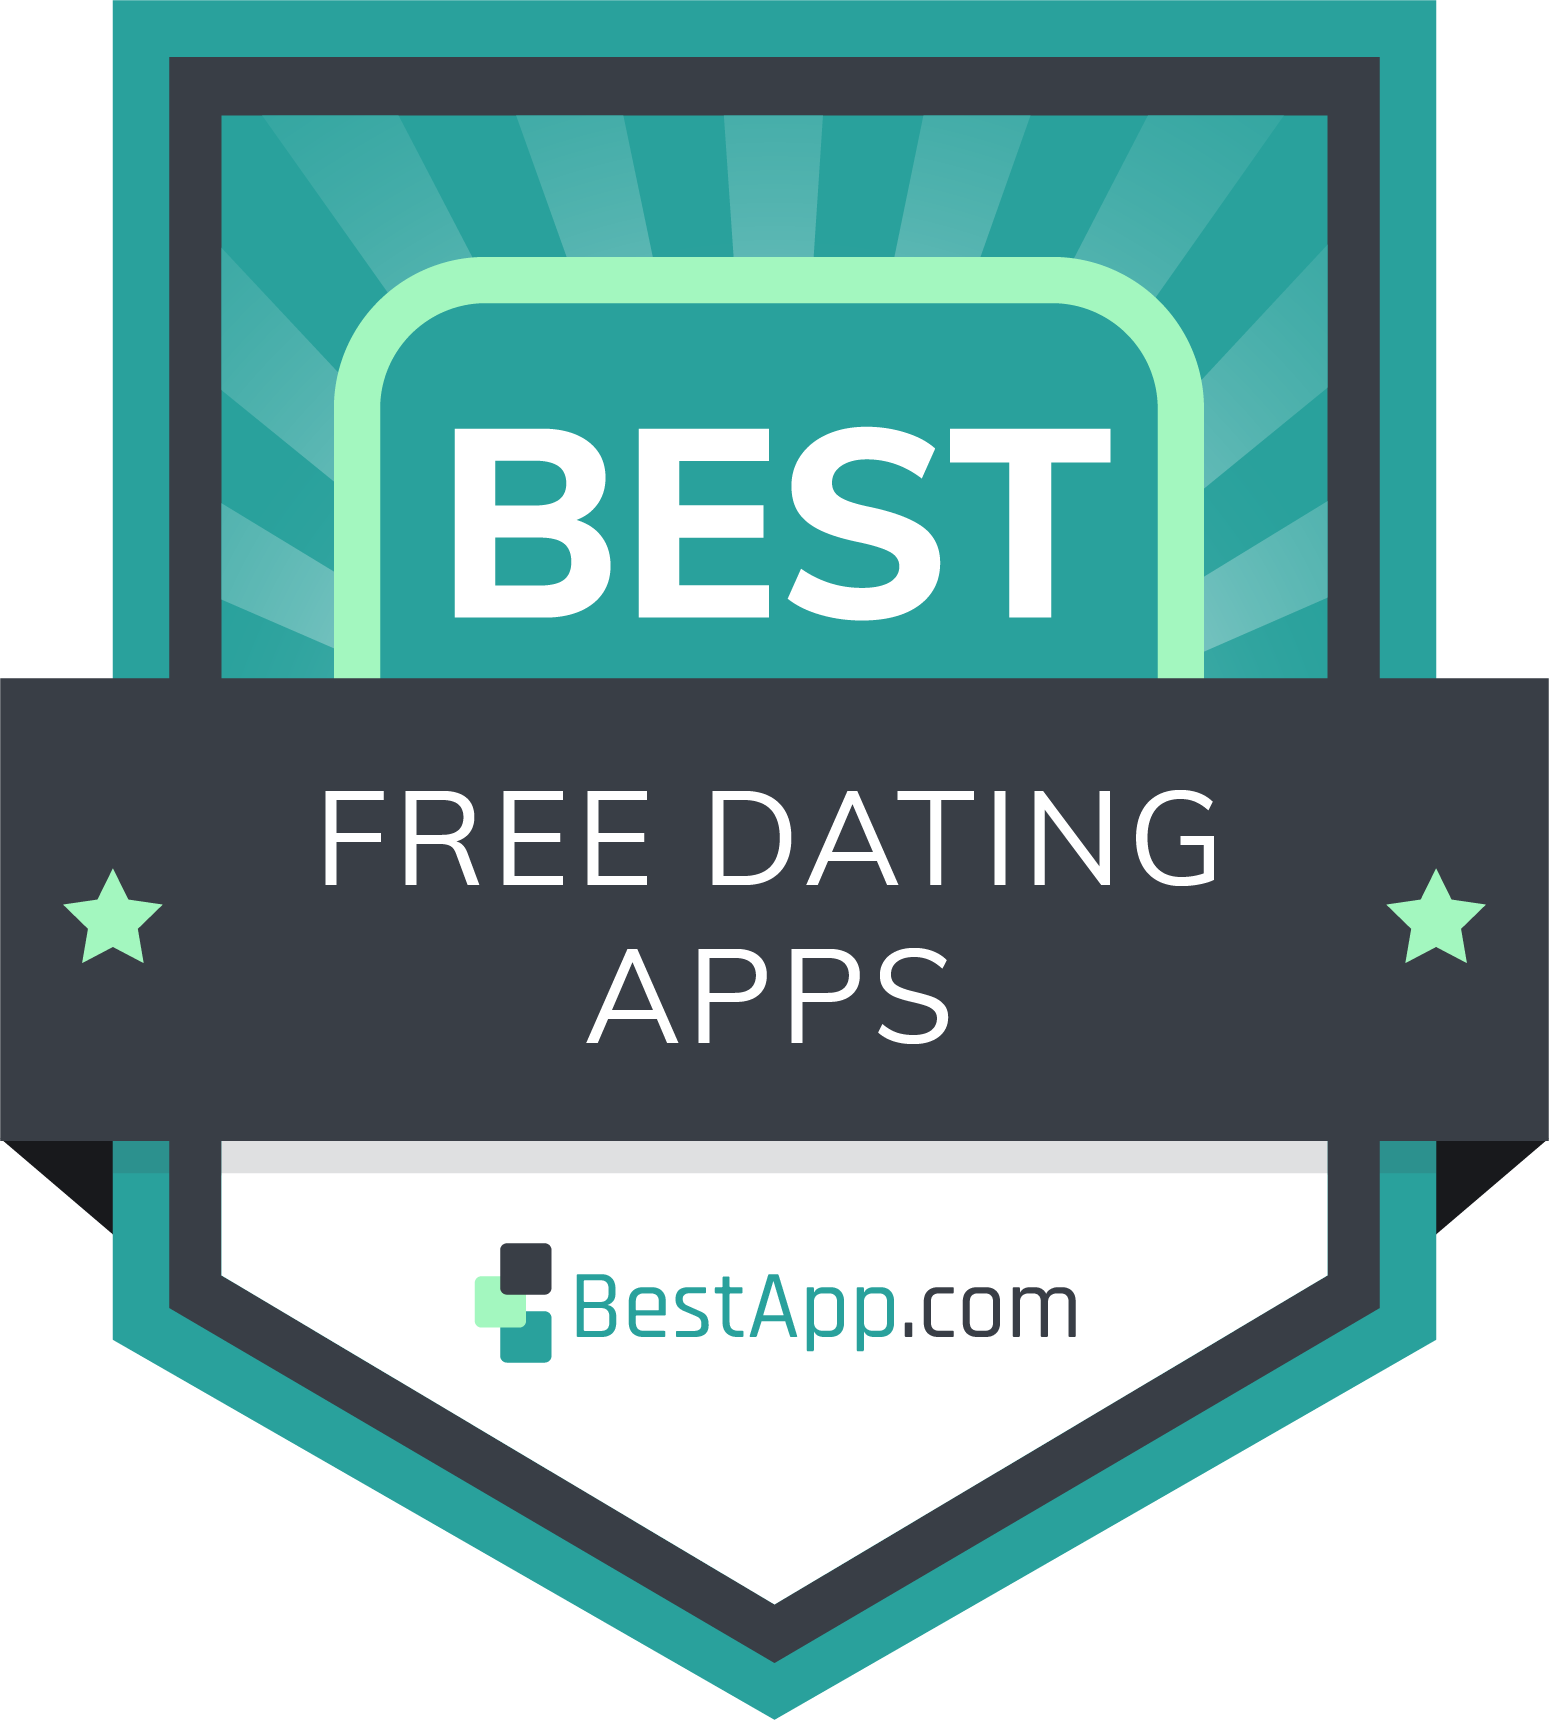 Best Free Dating Apps Badge